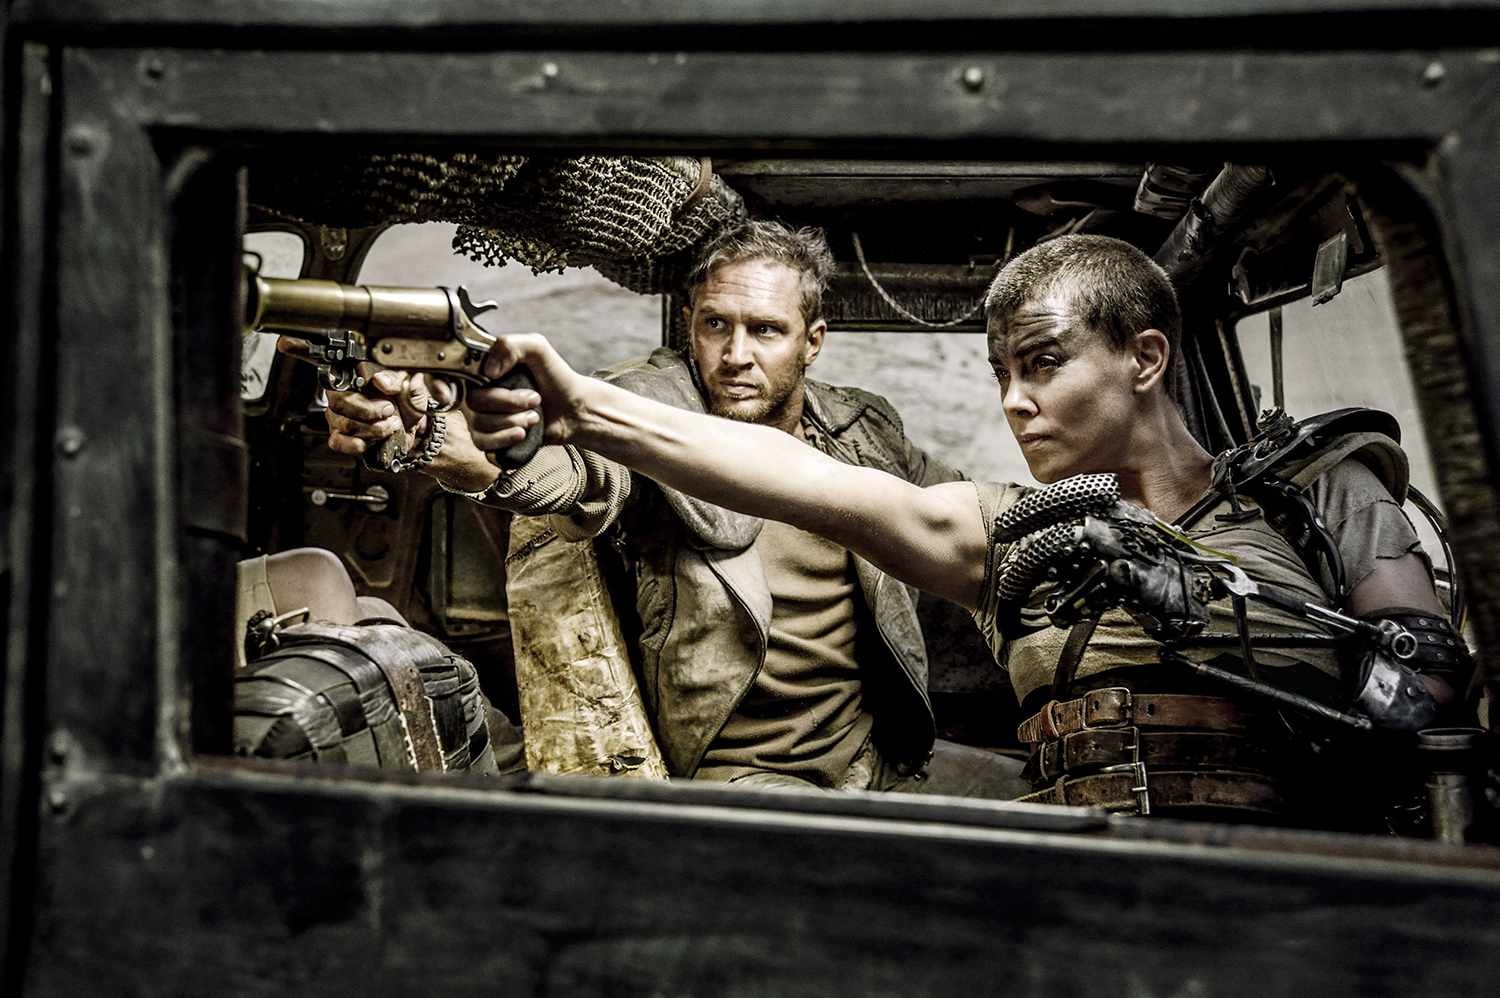 Tom Hardy and Charlize Theron in an action sequence in George Miller's Mad Max: Fury Road